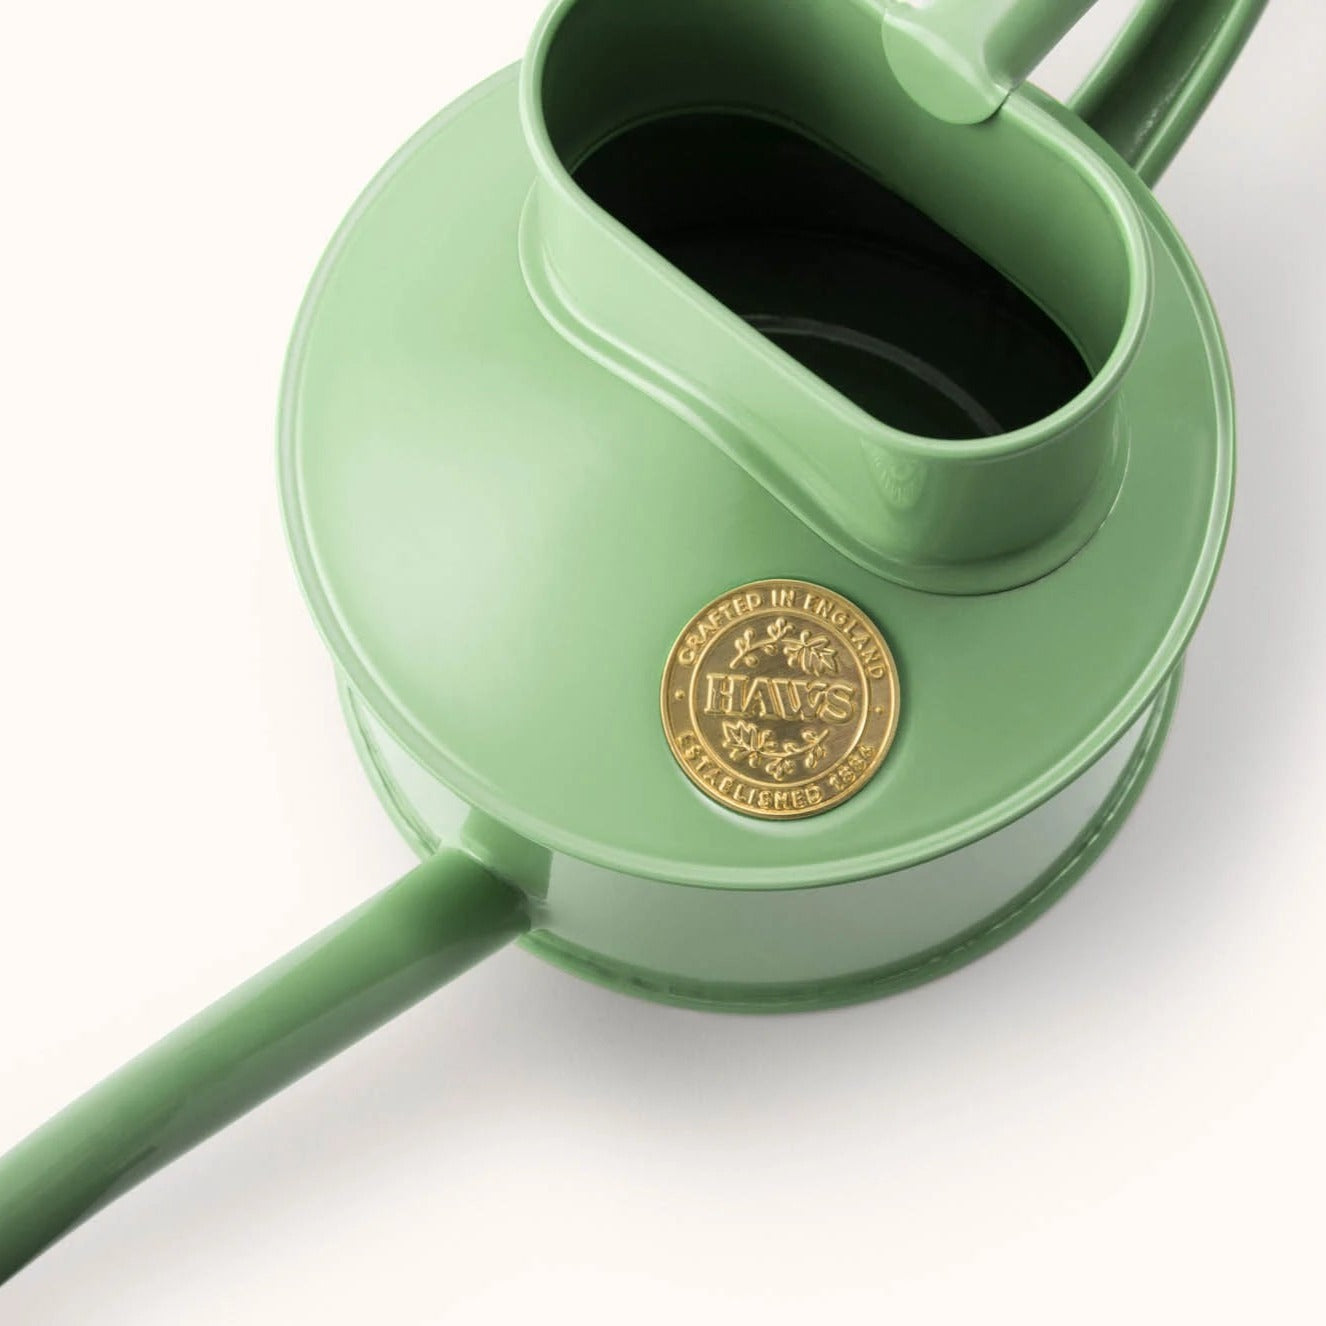 Haws 'Fazely Flow' Indoor Watering Can in Sage, Crafted in England